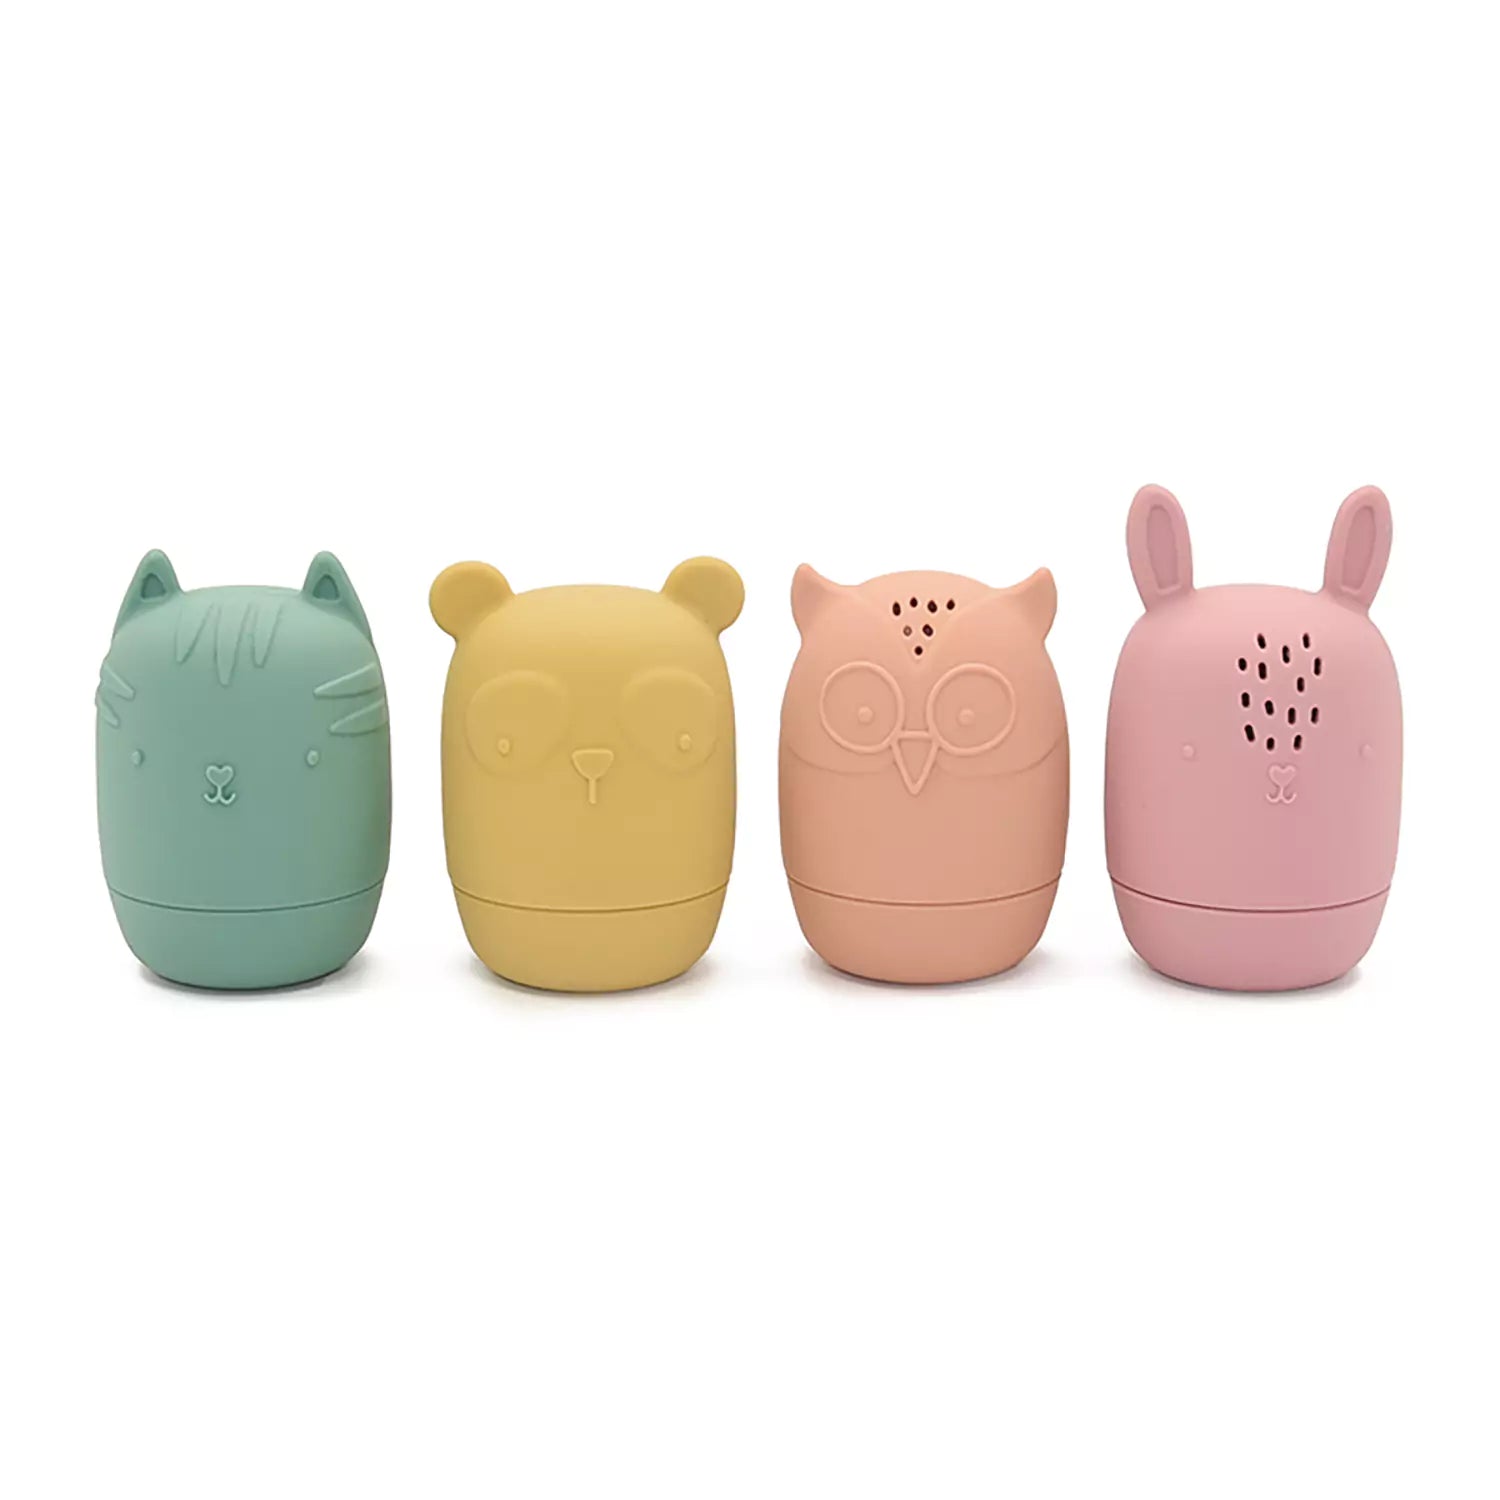 An image of Colorful Silicone Baby Bath Toys for Toddlers